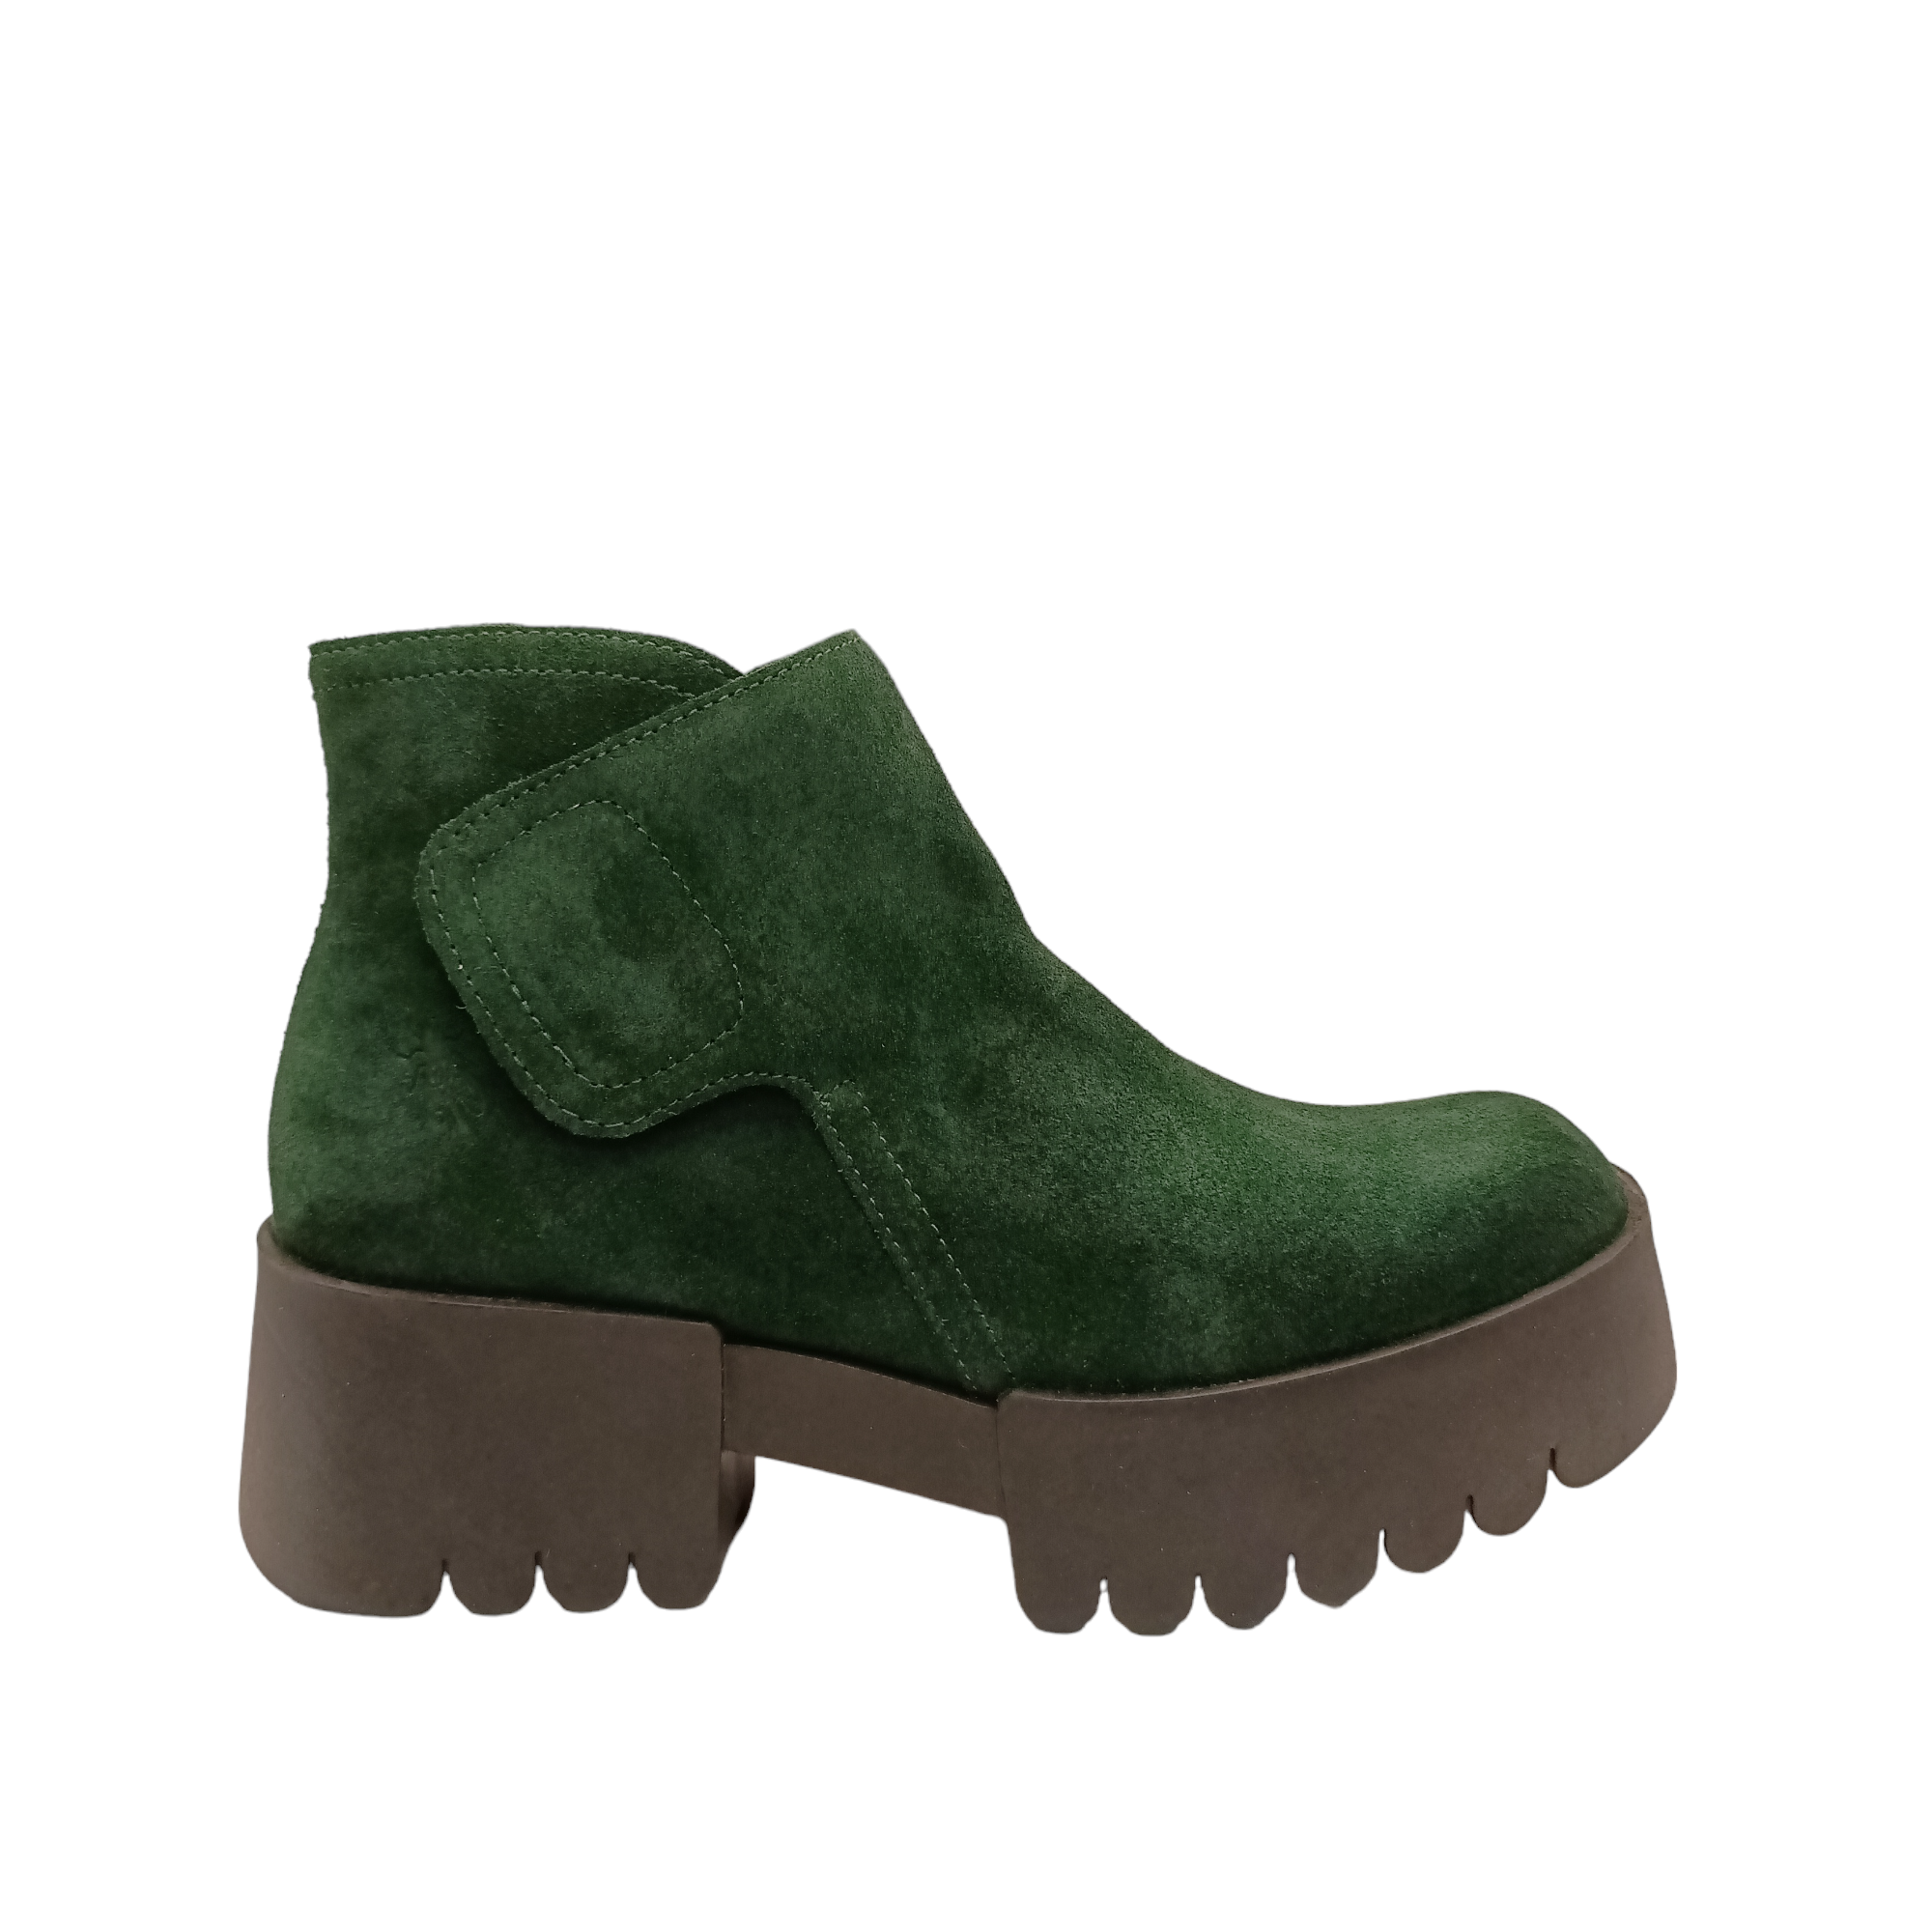 Shop Endo Fly London - with shoe&me - from Fly London - Boots - Boot, Winter, Womens - [collection]